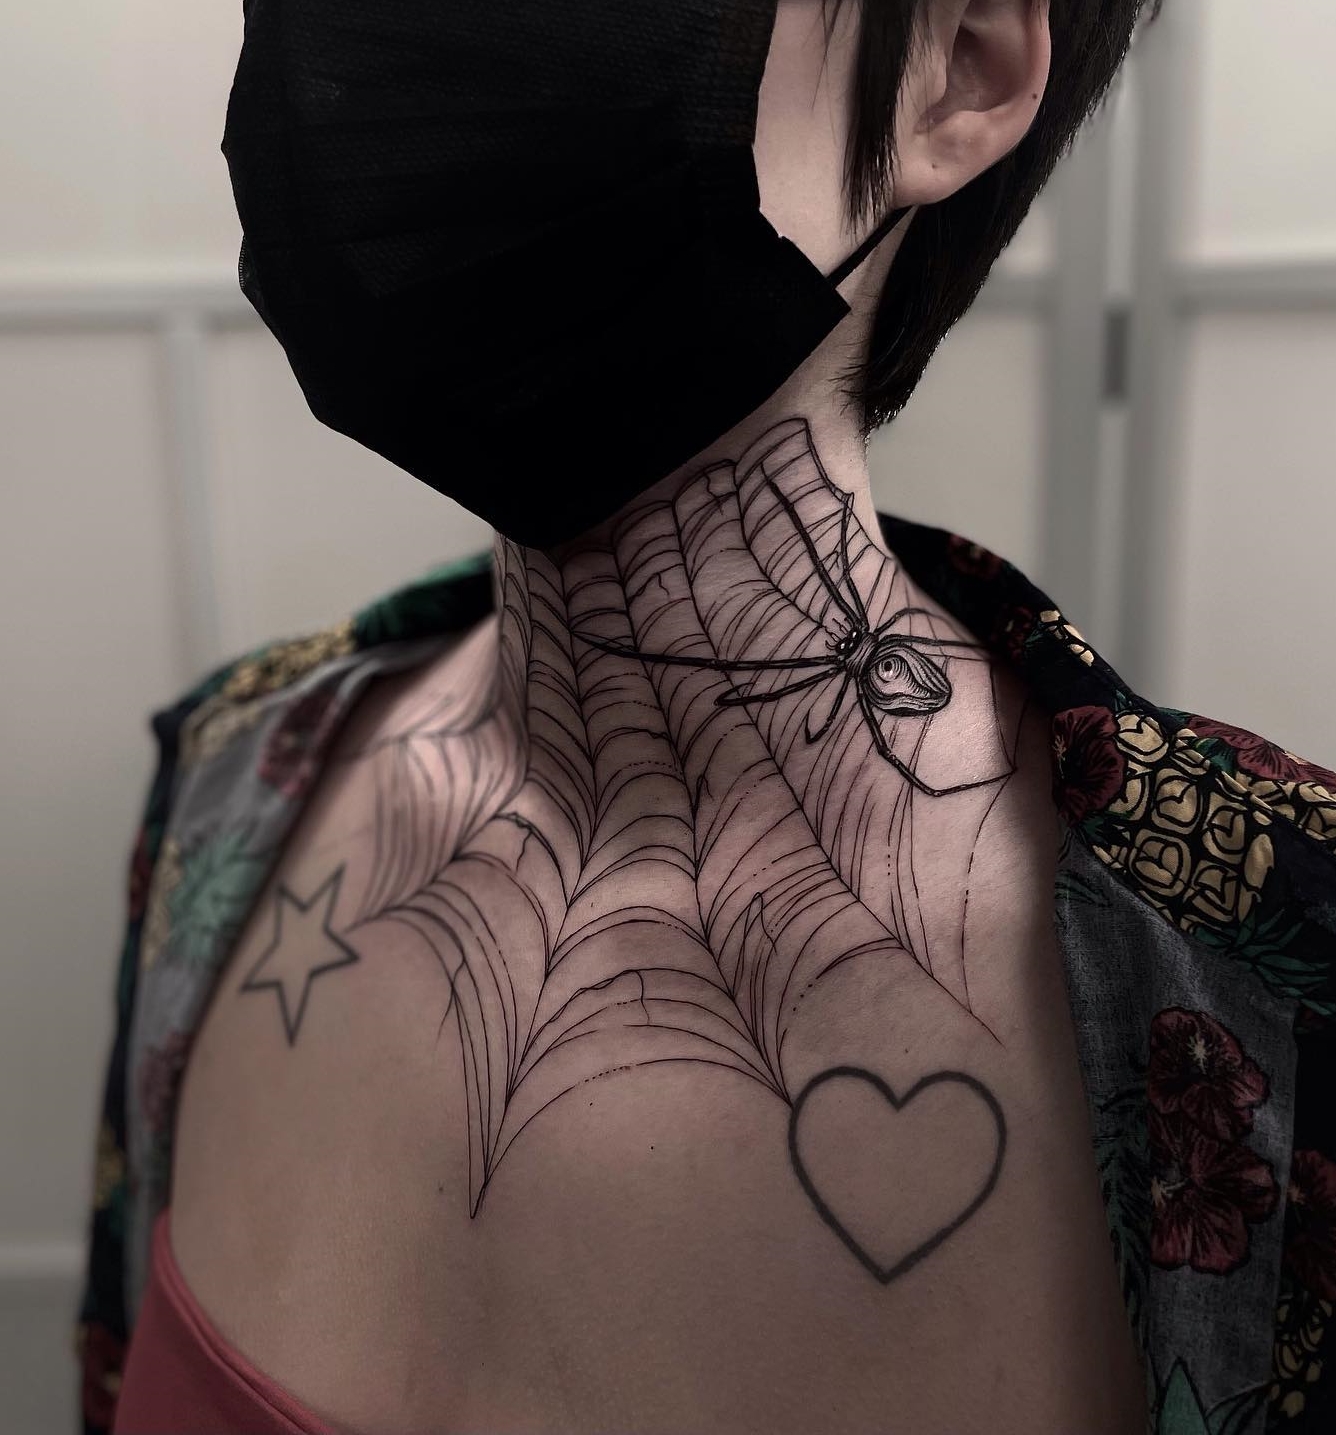 anya johnston recommends spider web throat tattoo pic